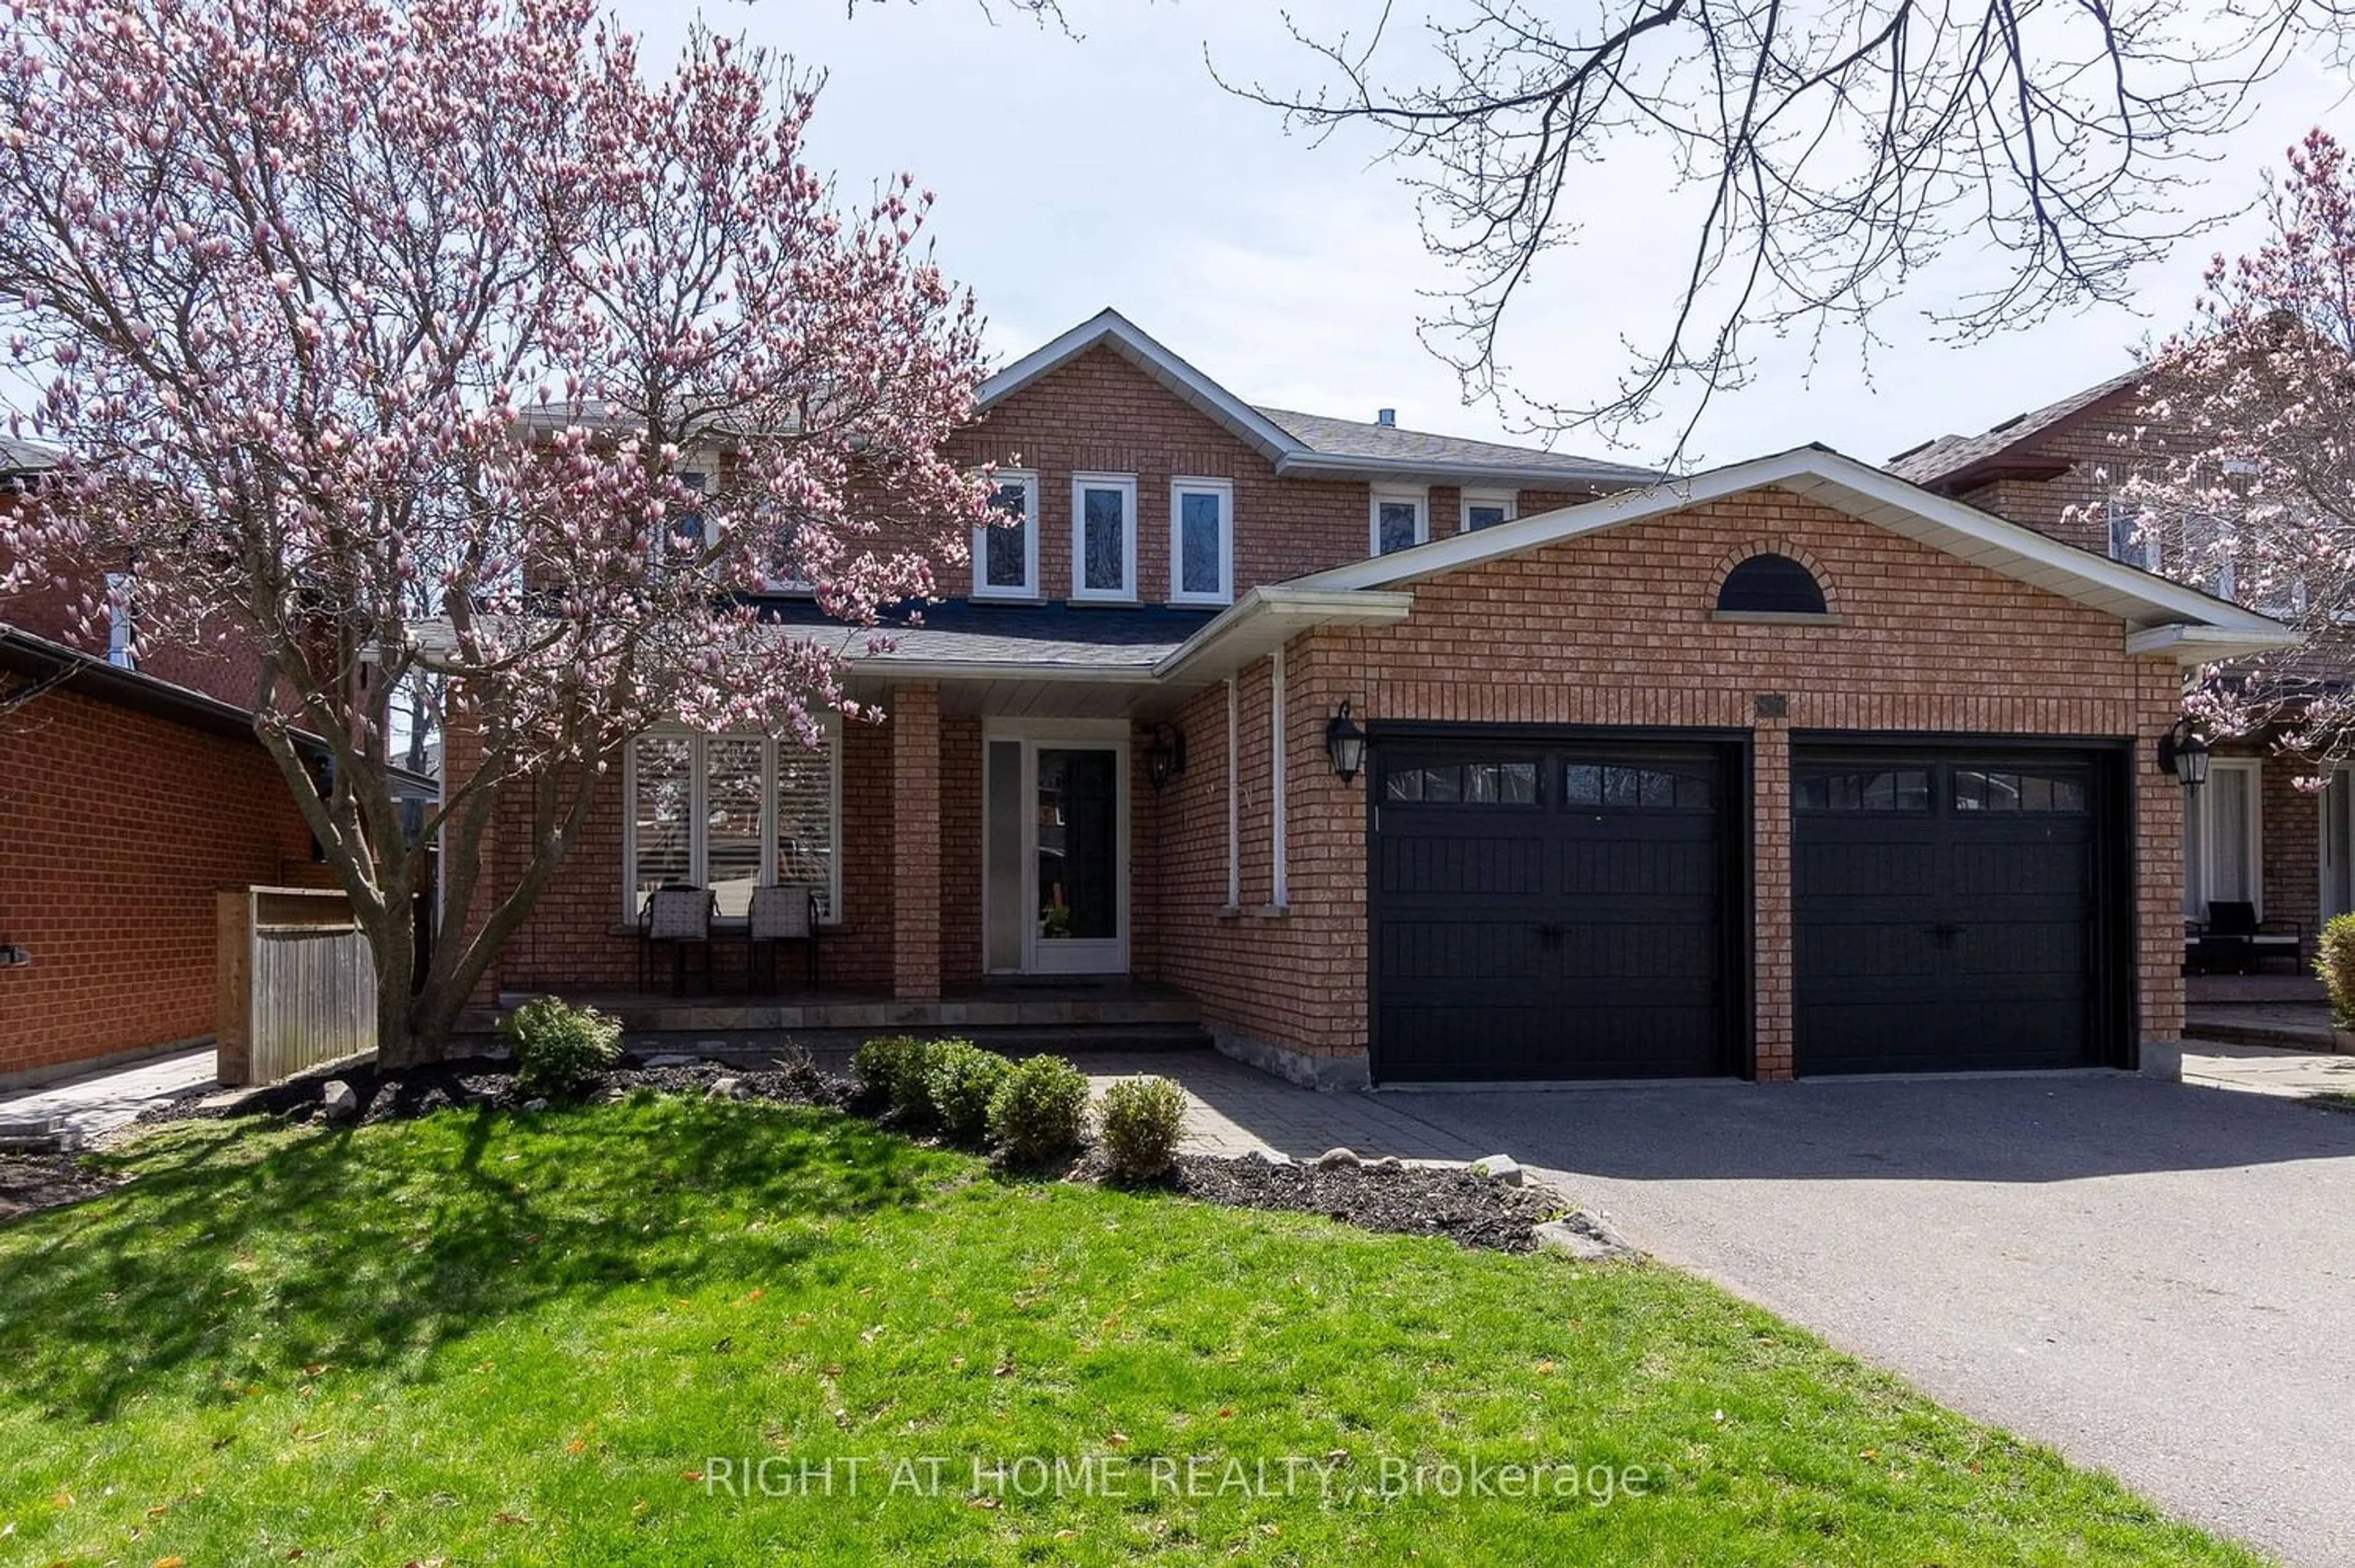 Home with brick exterior material for 37 Alloway Pl, Vaughan Ontario L6A 1N9